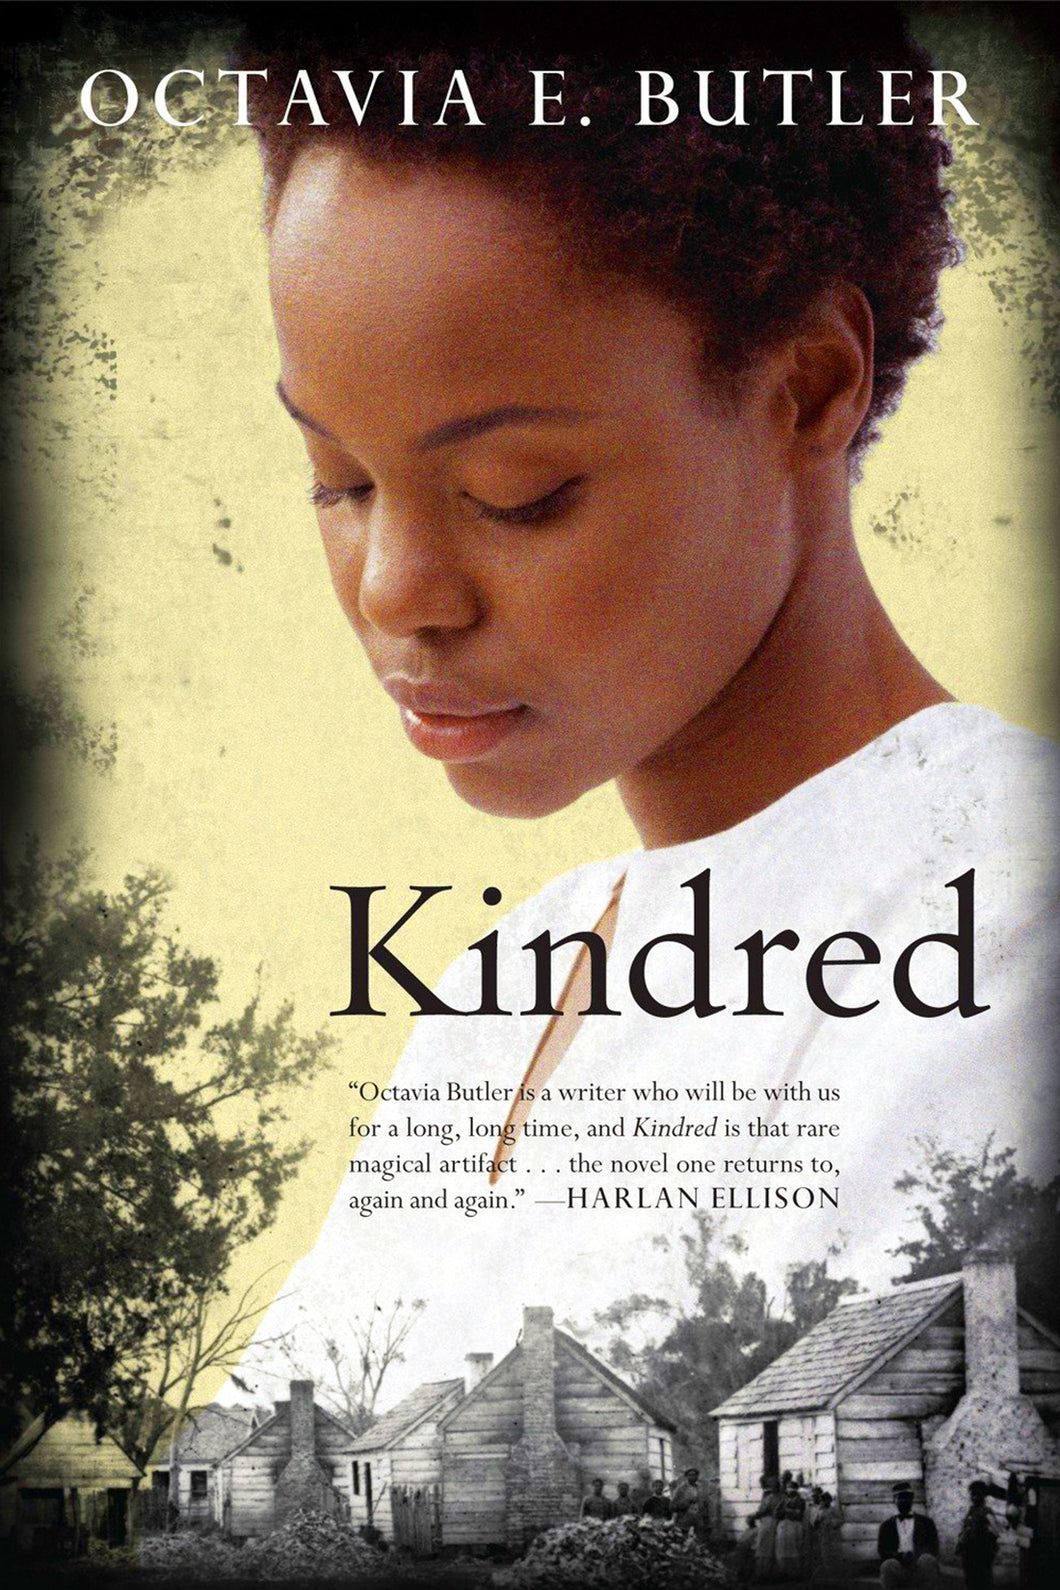 Kindred by Octavia E. Butler / Hardcover or Paperback - NEW BOOK OR BOOK BOX